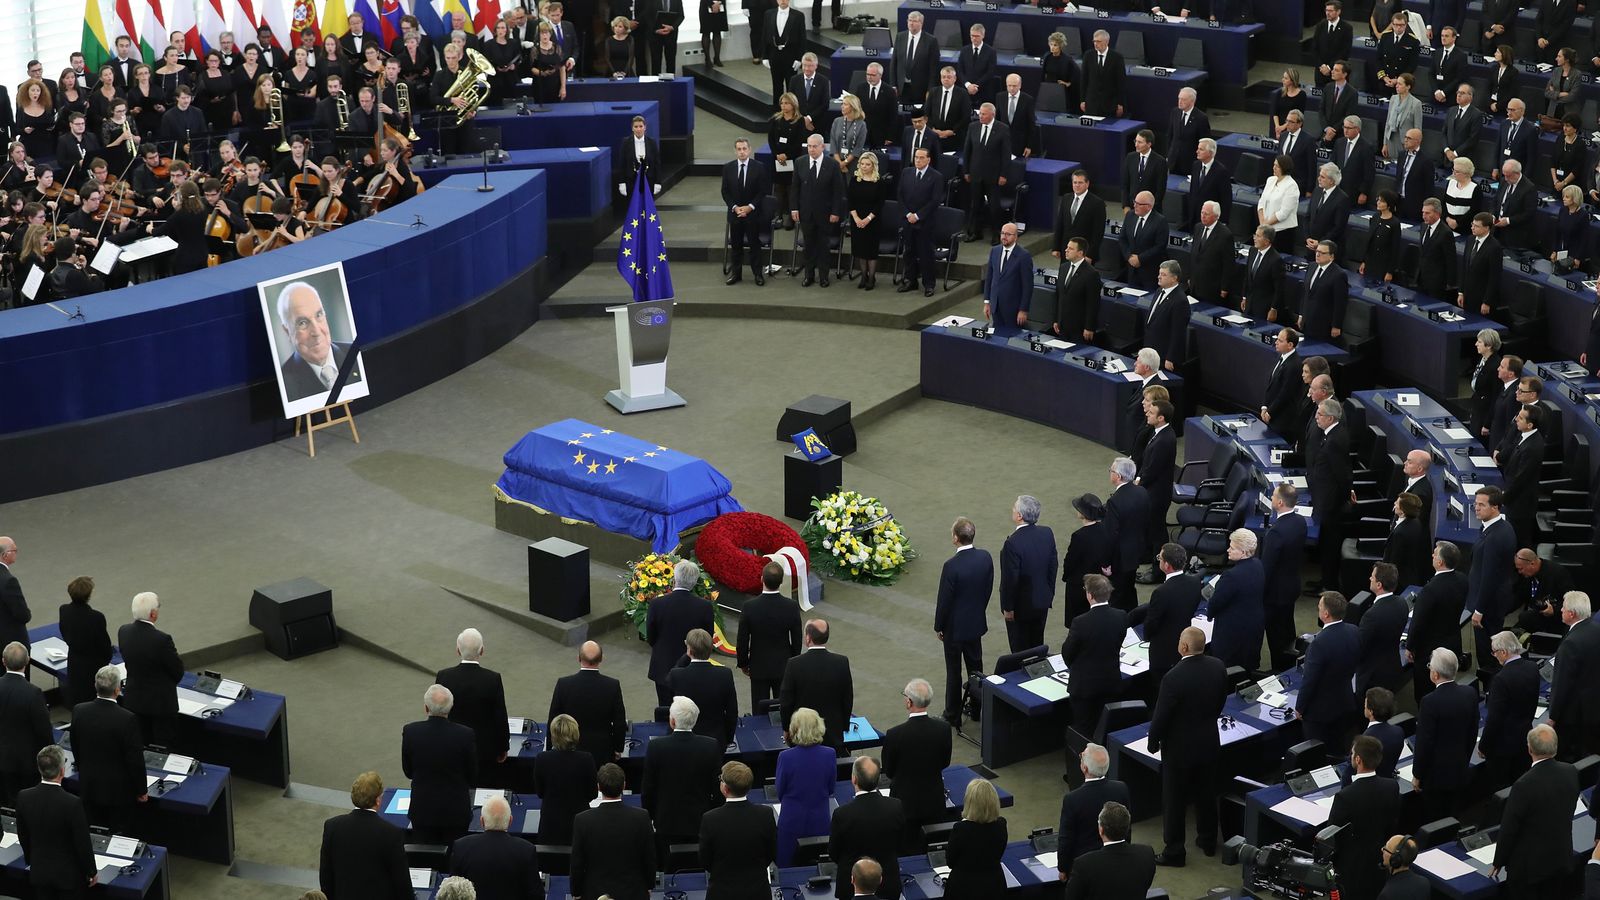 World leaders pay their respects to the former German Chancellor